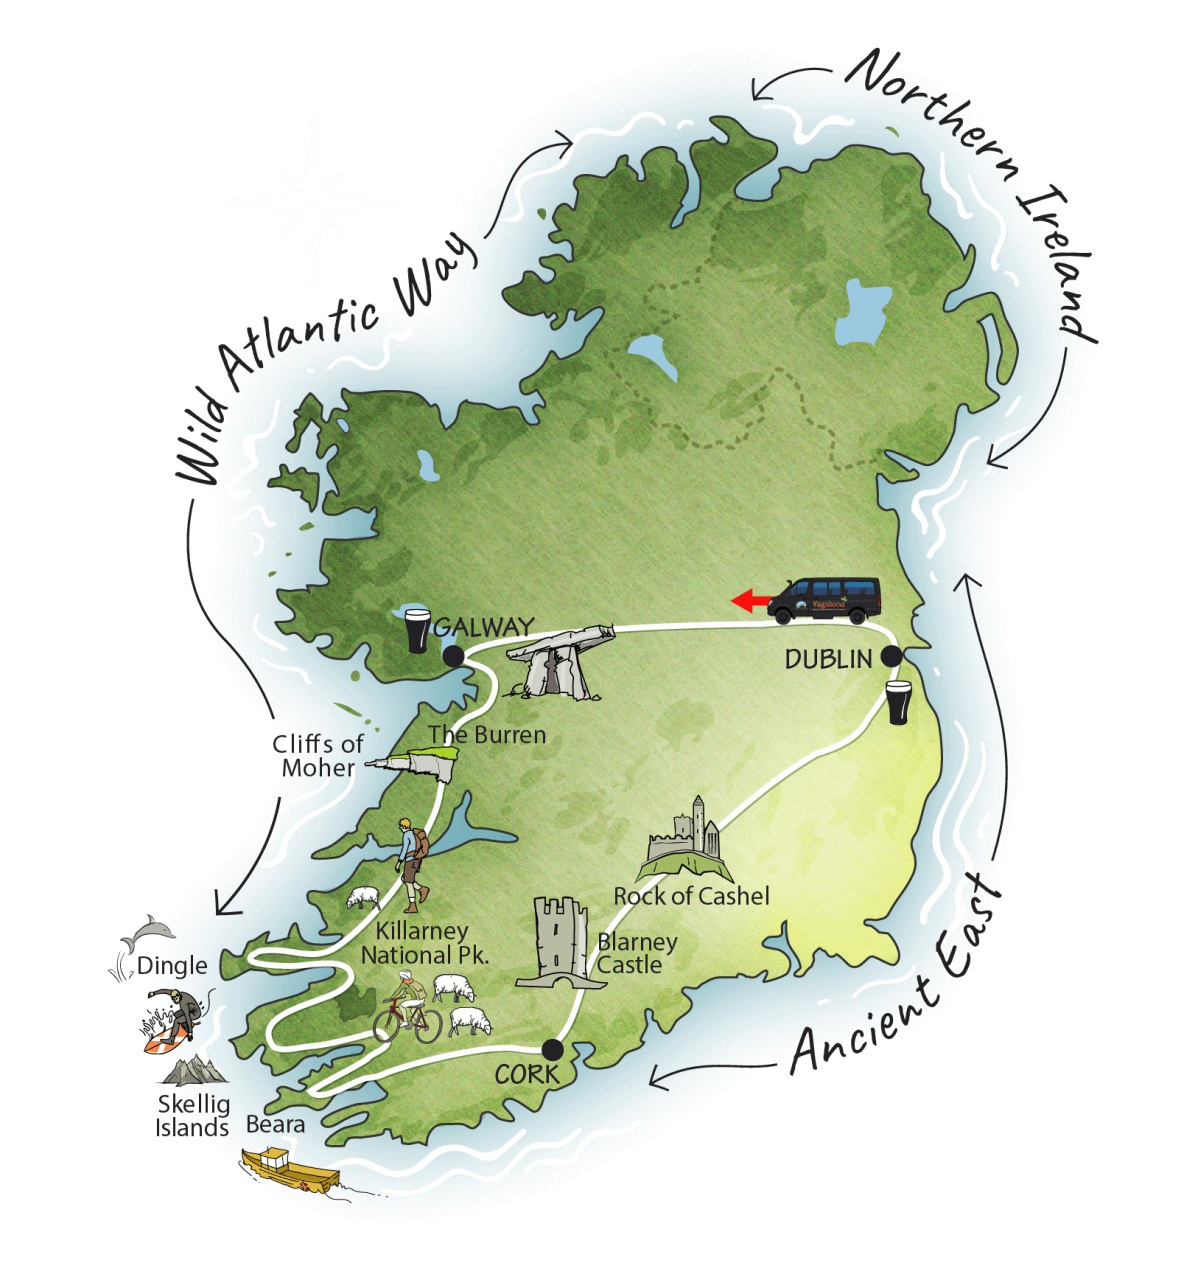 Map showing tour route for Vagabond 7 Day World Tour of Ireland